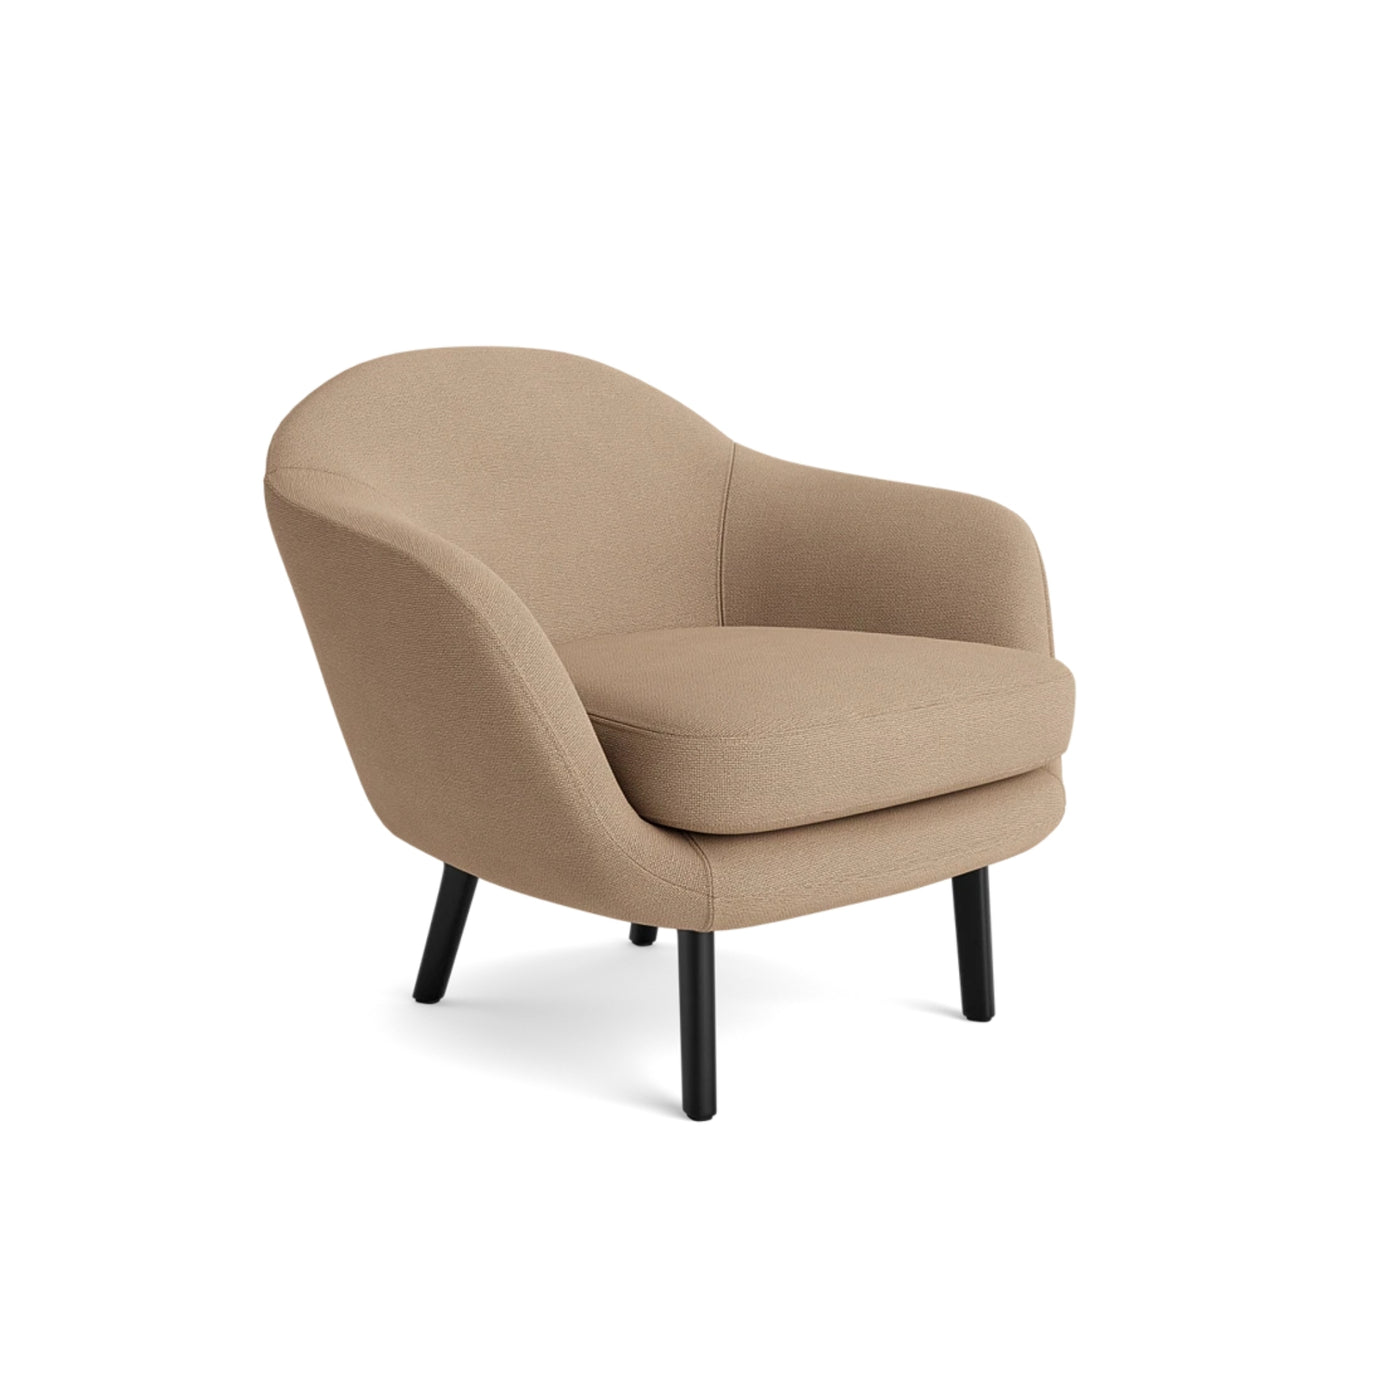 Normann Copenhagen Sum Armchair. Made to order at someday designs. #colour_hallingdal-224